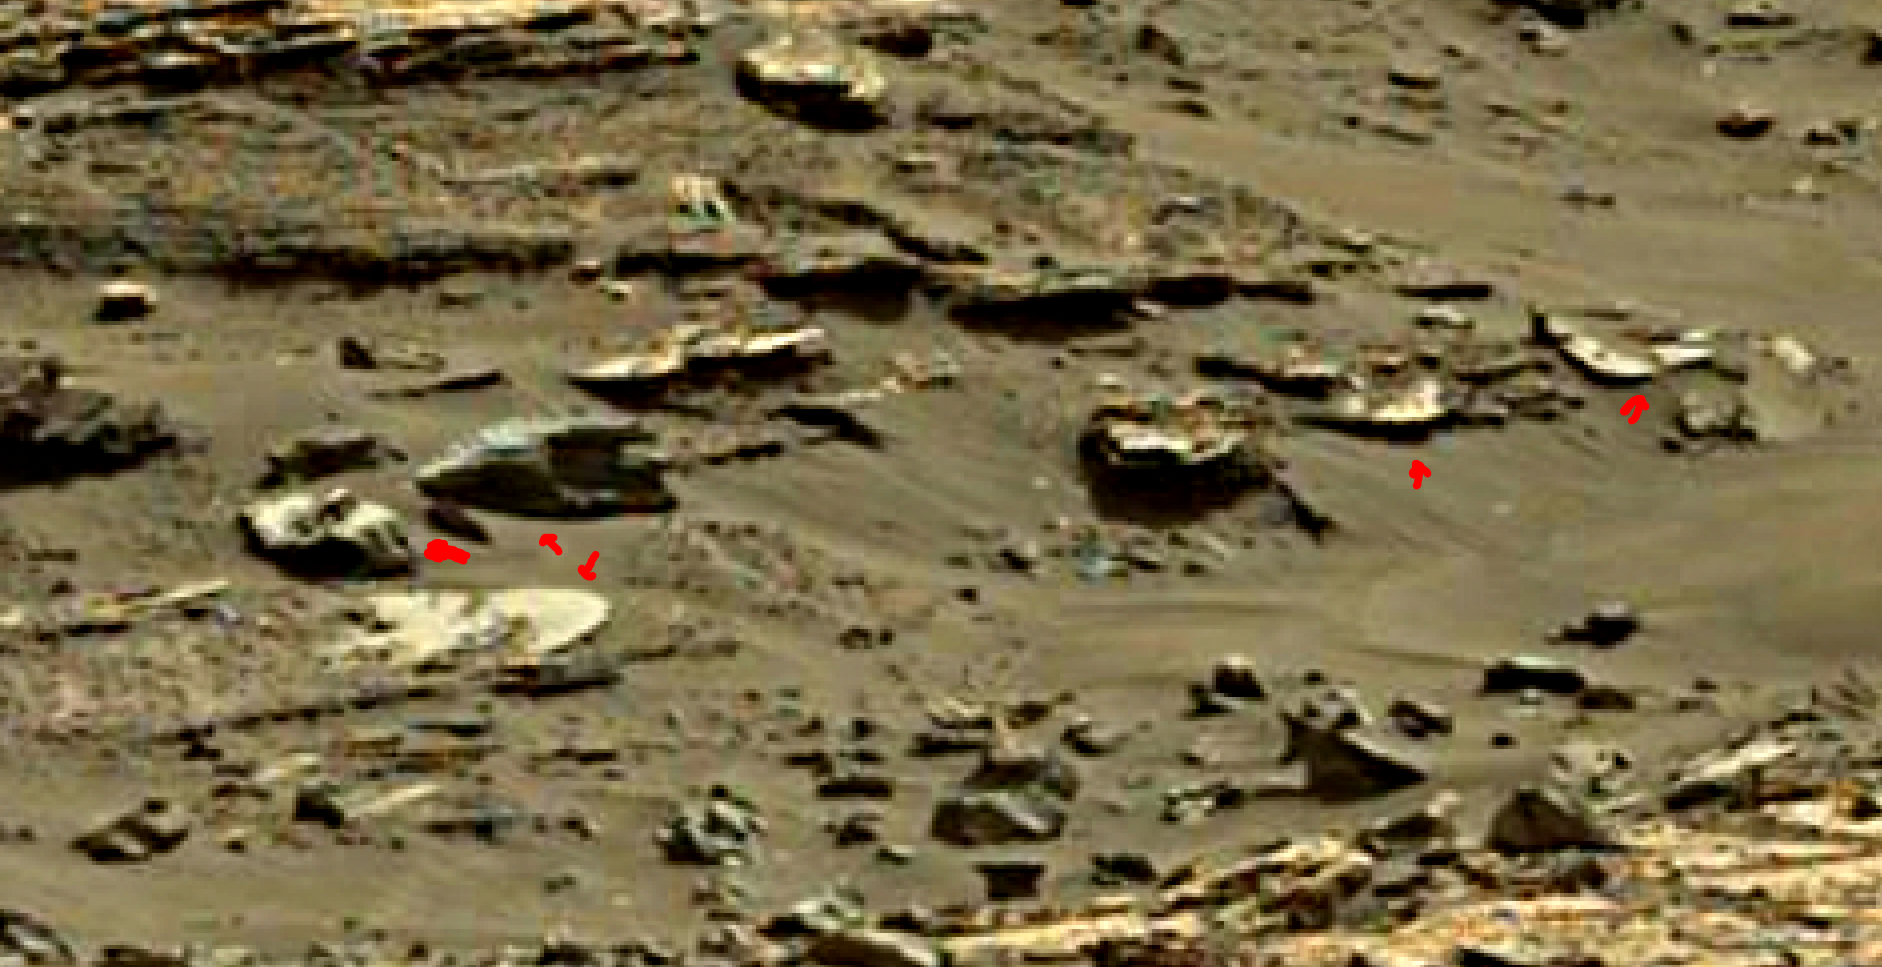 mars-sol-1451-anomaly-artifacts-13-was-life-on-mars